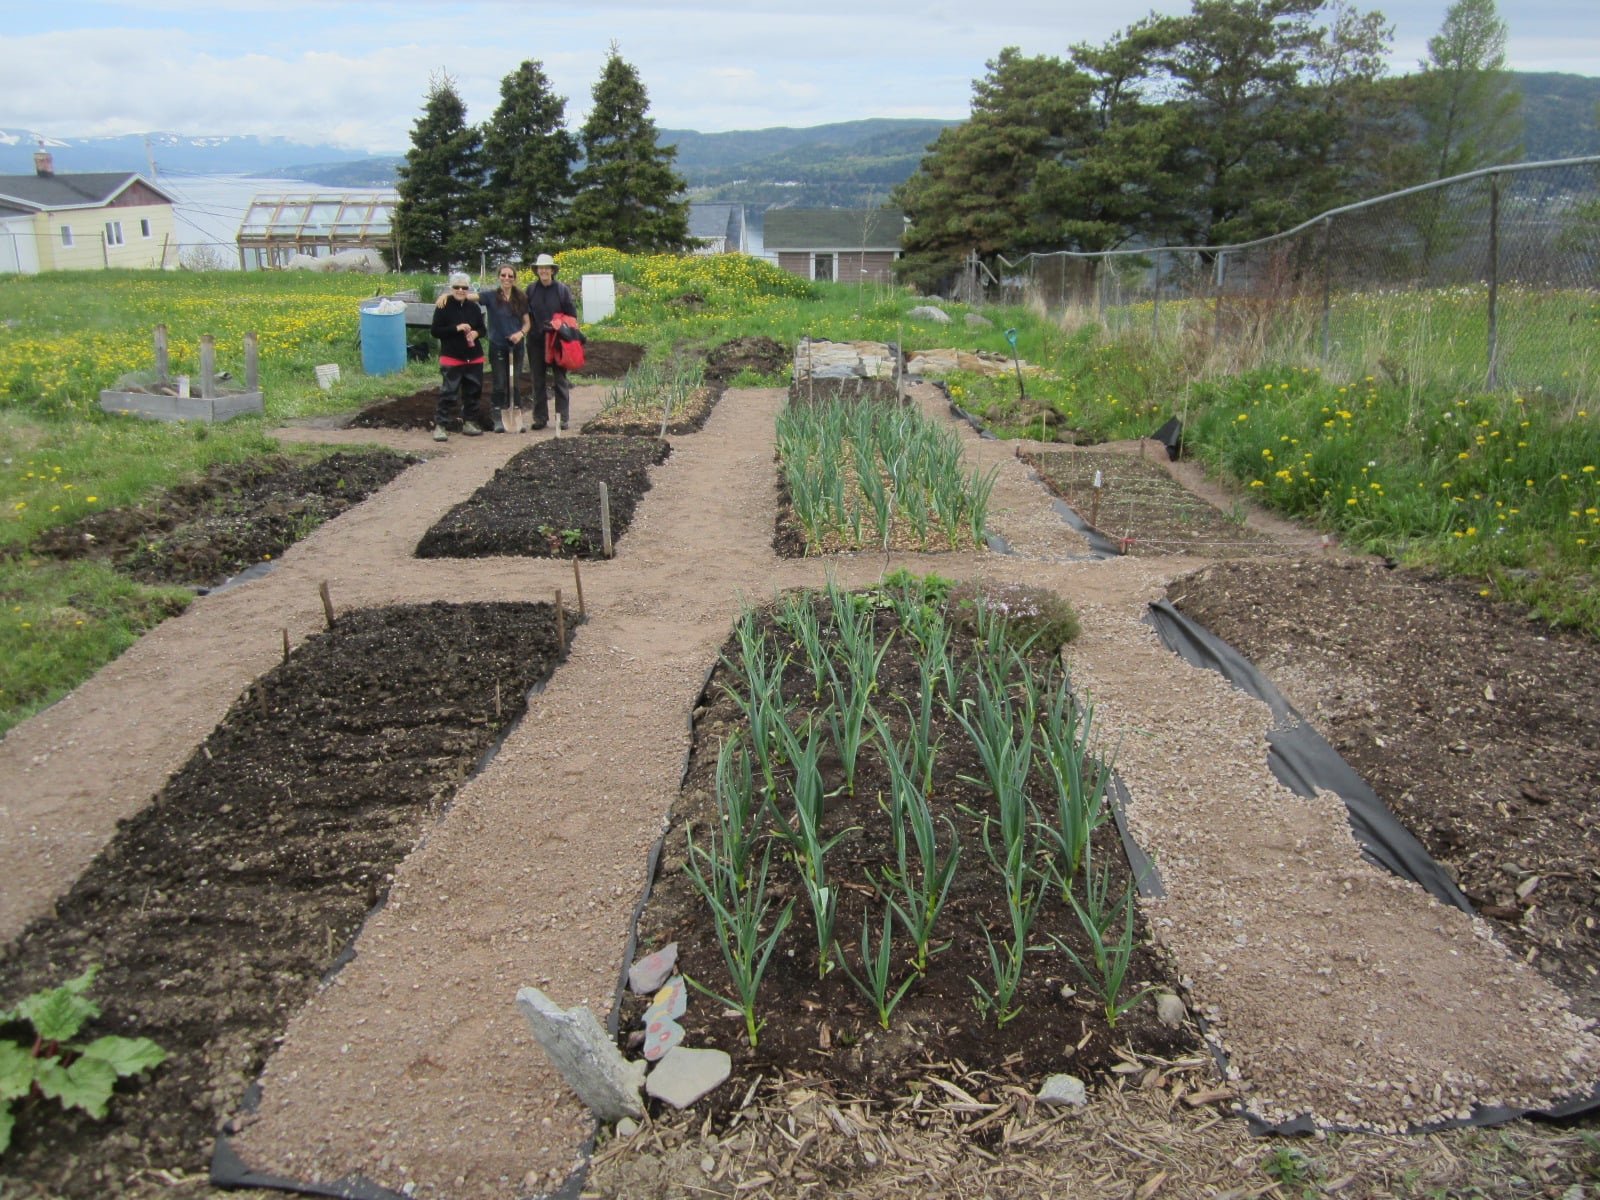 Join us on Saturday at the Heights Community Garden to help prepare for the upcoming gardening season! We'll tidy up the garden, sift compost, and have a chat with fellow gardeners.

May 4th, 10-11am. RSVP to info@wecnl.ca or just drop by! Wear garde